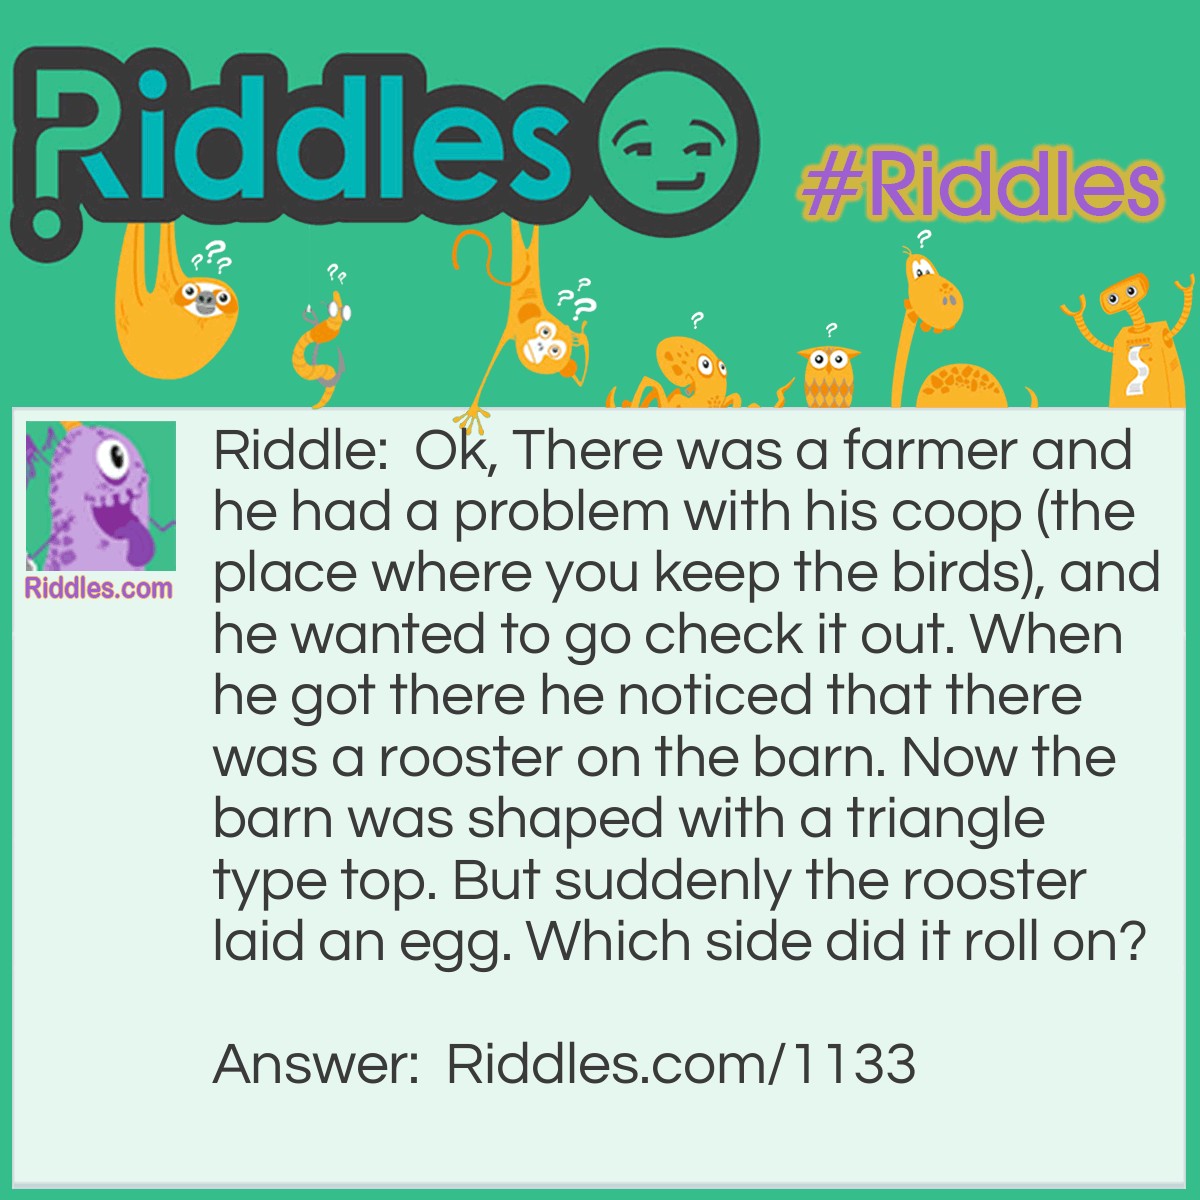 Riddle: Ok, There was a farmer and he had a problem with his coop (the place where you keep the birds), and he wanted to go check it out. When he got there he noticed that there was a rooster on the barn. Now the barn was shaped with a triangle type top. But suddenly the rooster laid an egg. Which side did it roll on? Answer: It didn't because roosters don't lay eggs.